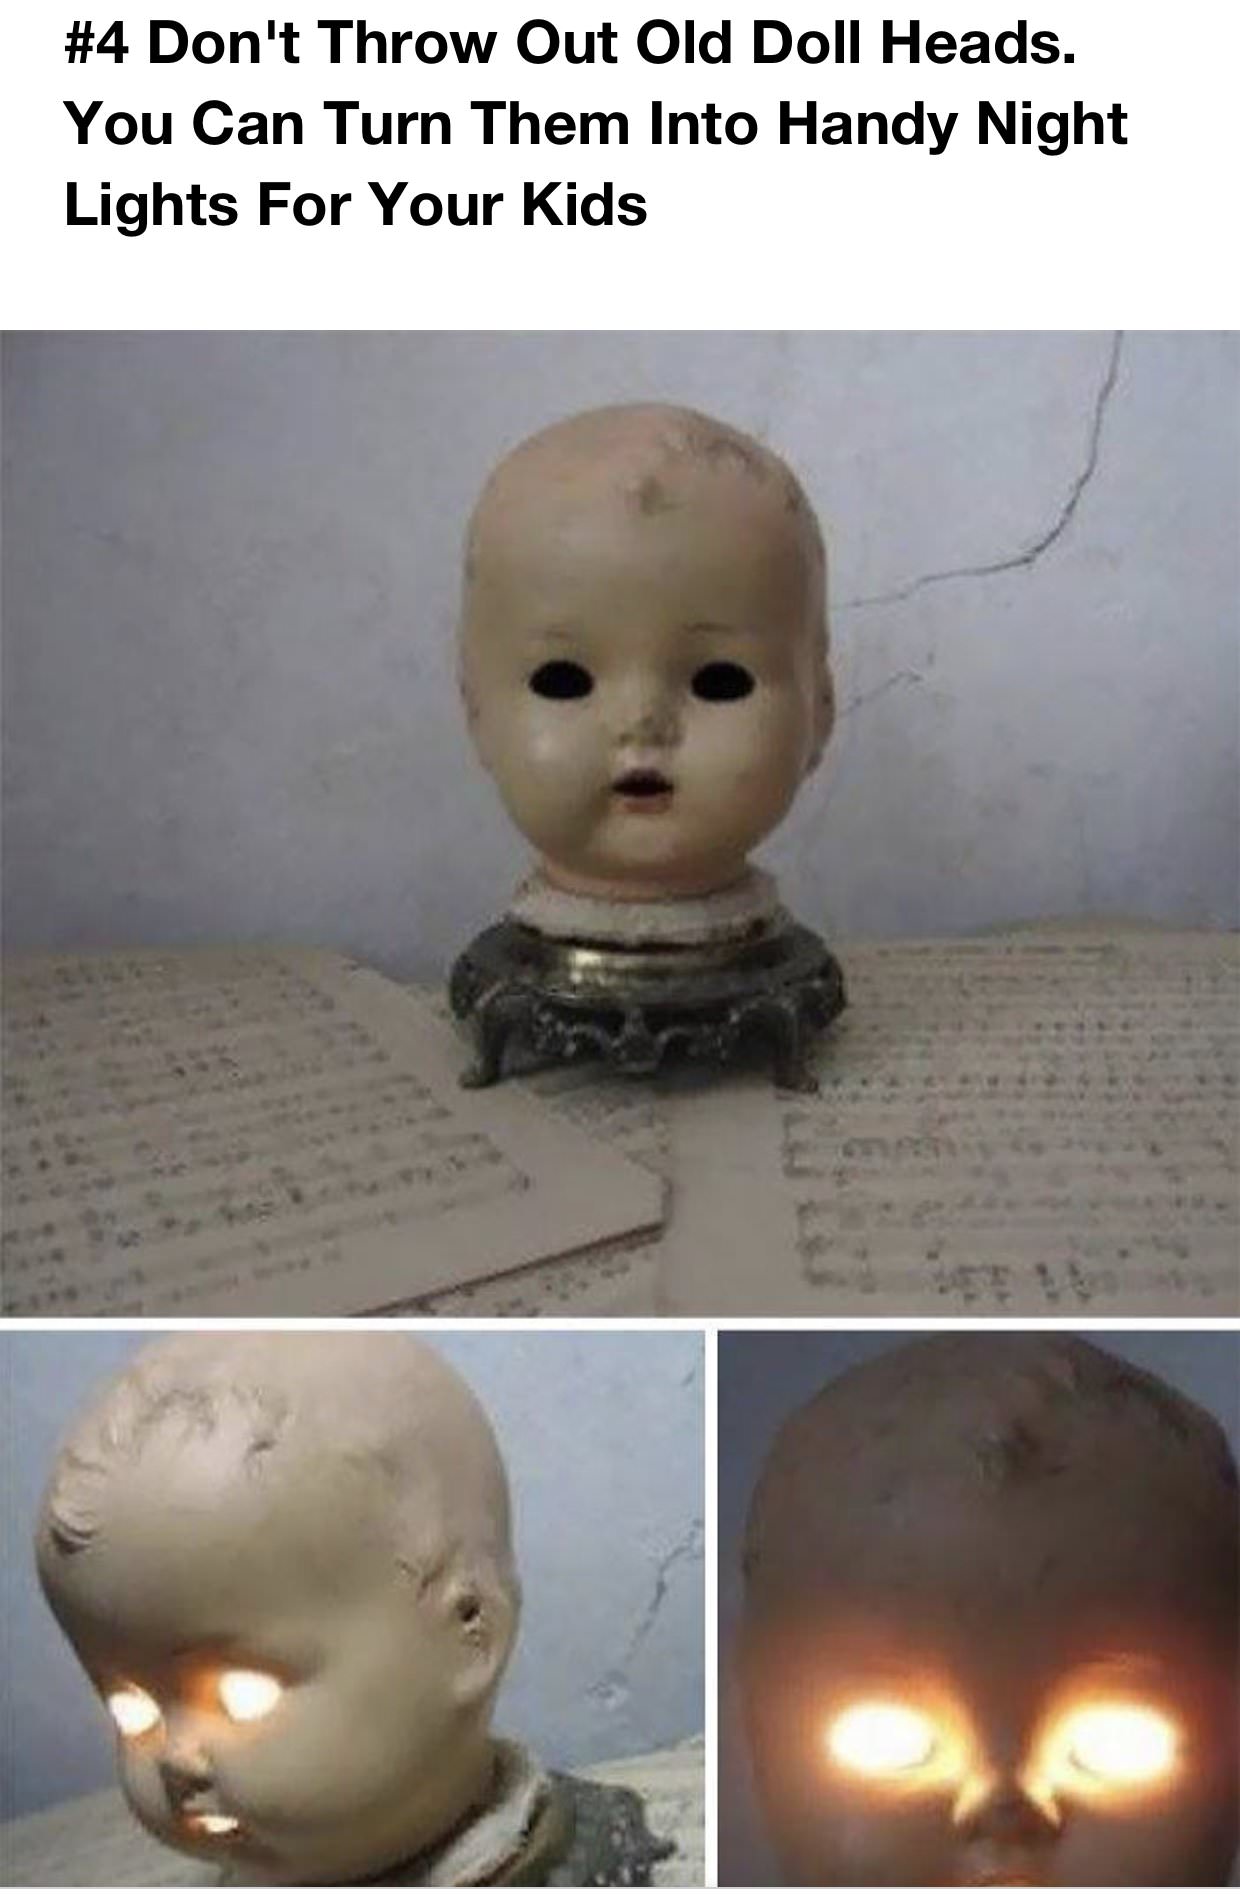 doll head lamp - Don't Throw Out Old Doll Heads. You Can Turn Them Into Handy Night Lights For Your Kids